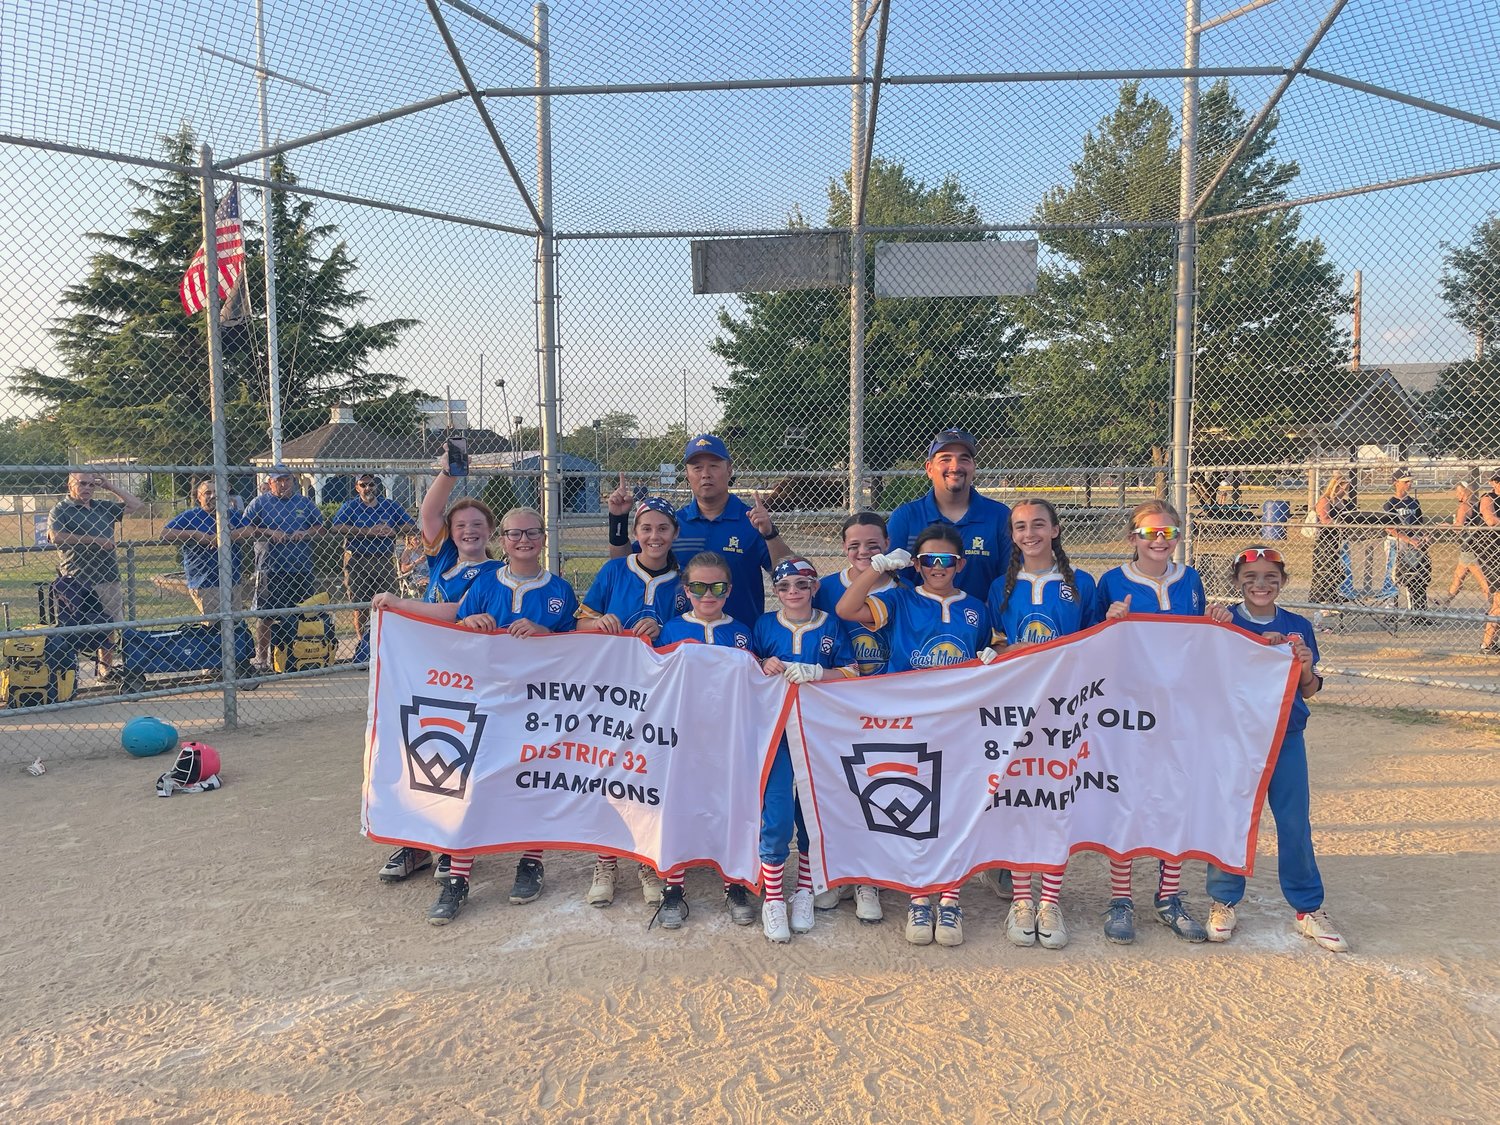 The East Meadow 2022 10U girls’ softball Williamsport team played their hardest, losing only in the semi-finals to a team from Staten Island after being in Rochester since July 19.